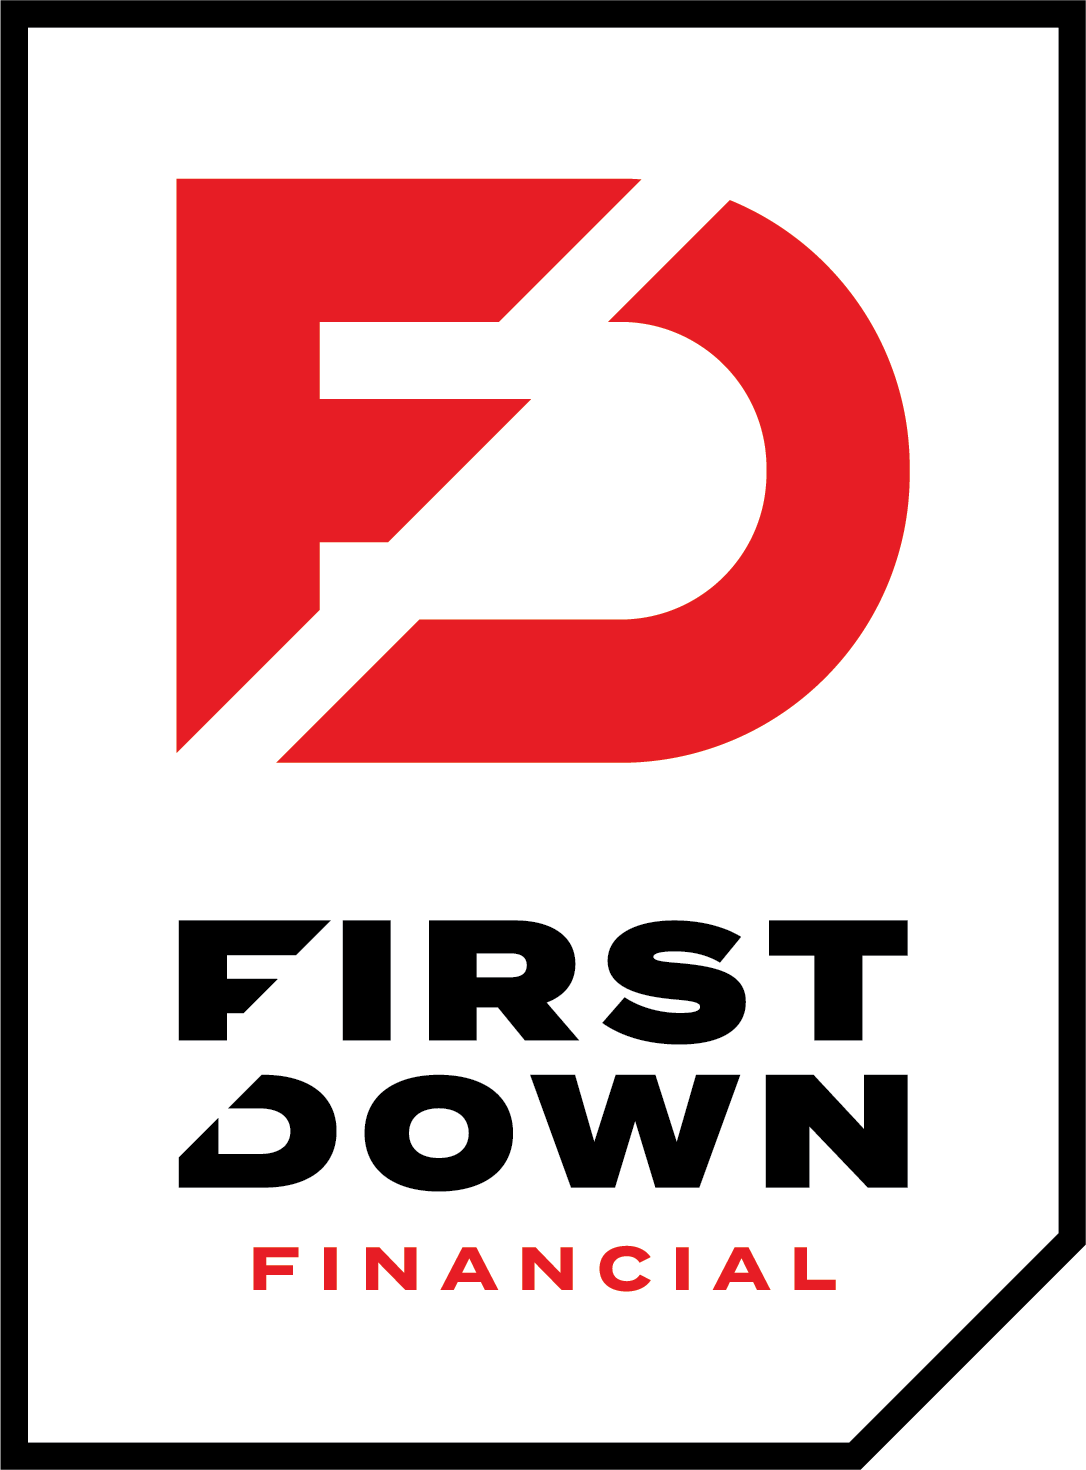 A logo for first down financial with a red arrow